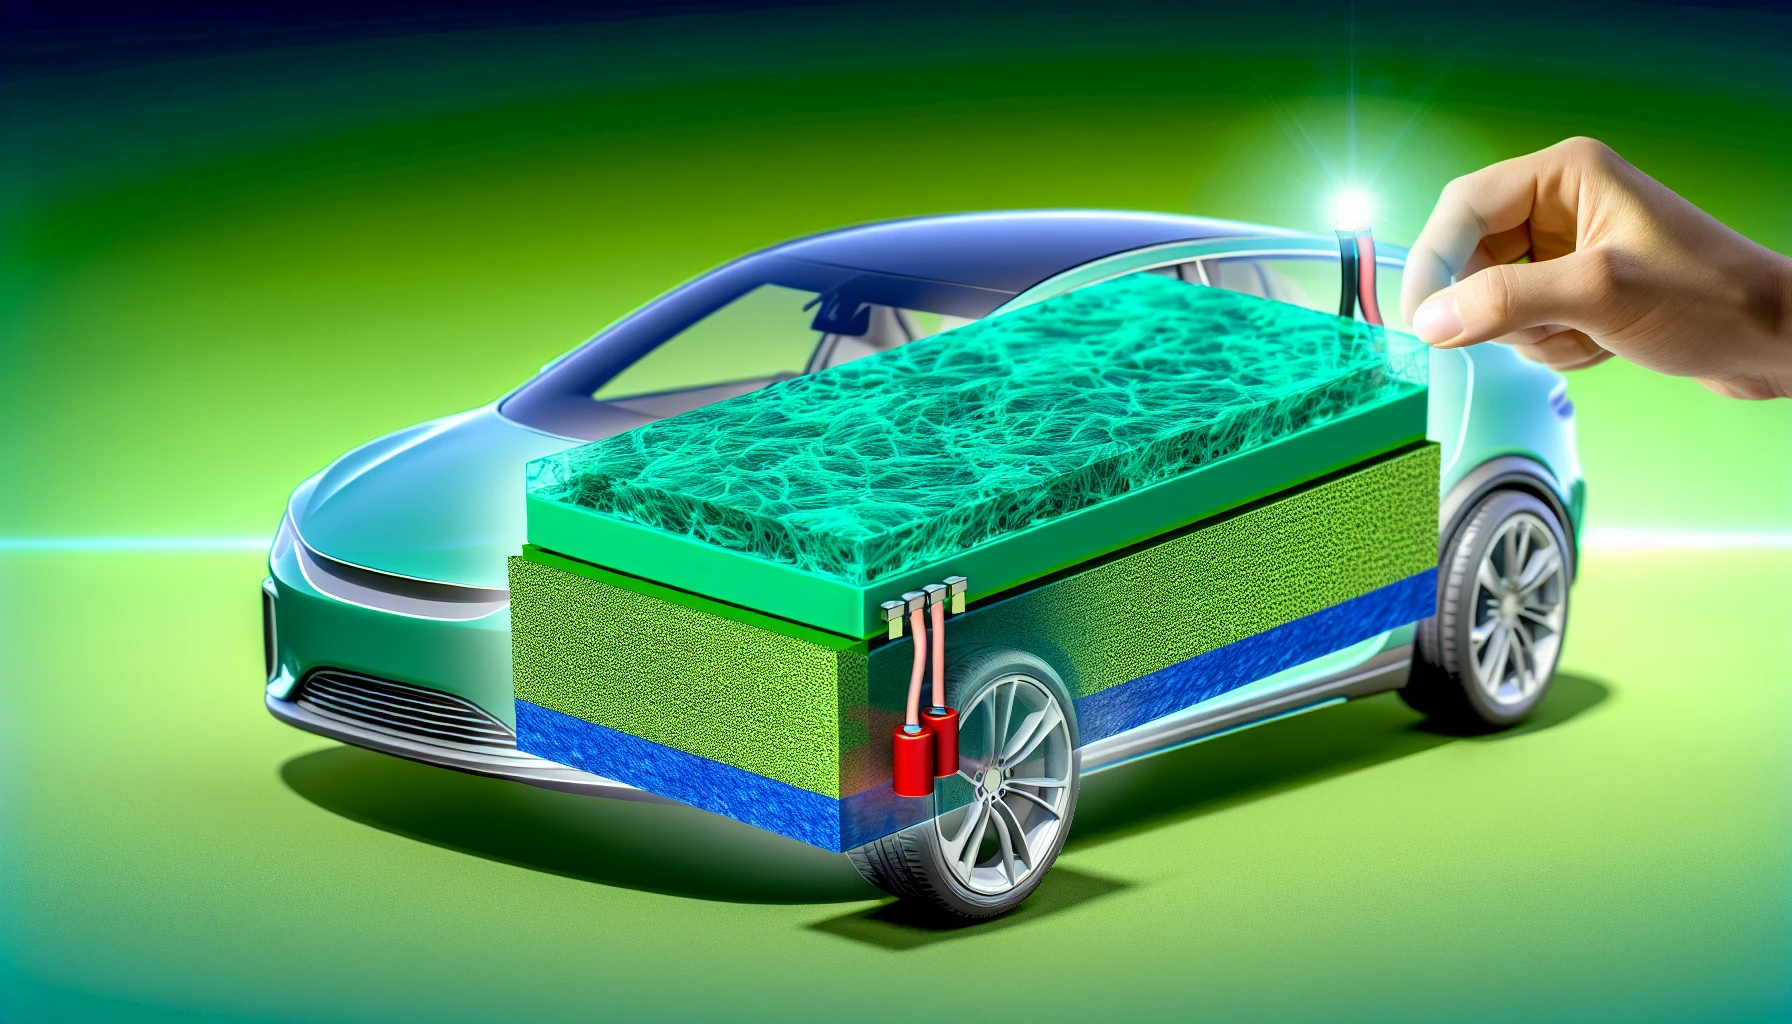 Composite materials being used in electric vehicle battery enclosures